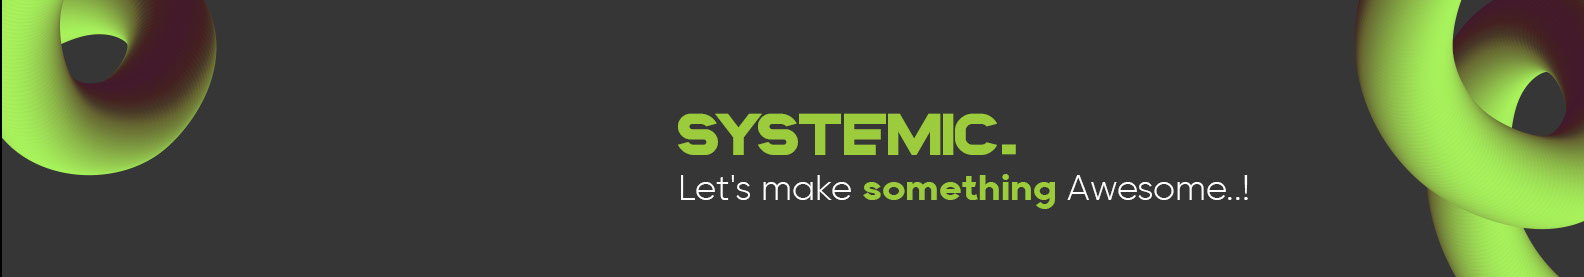 Systemic .'s profile banner